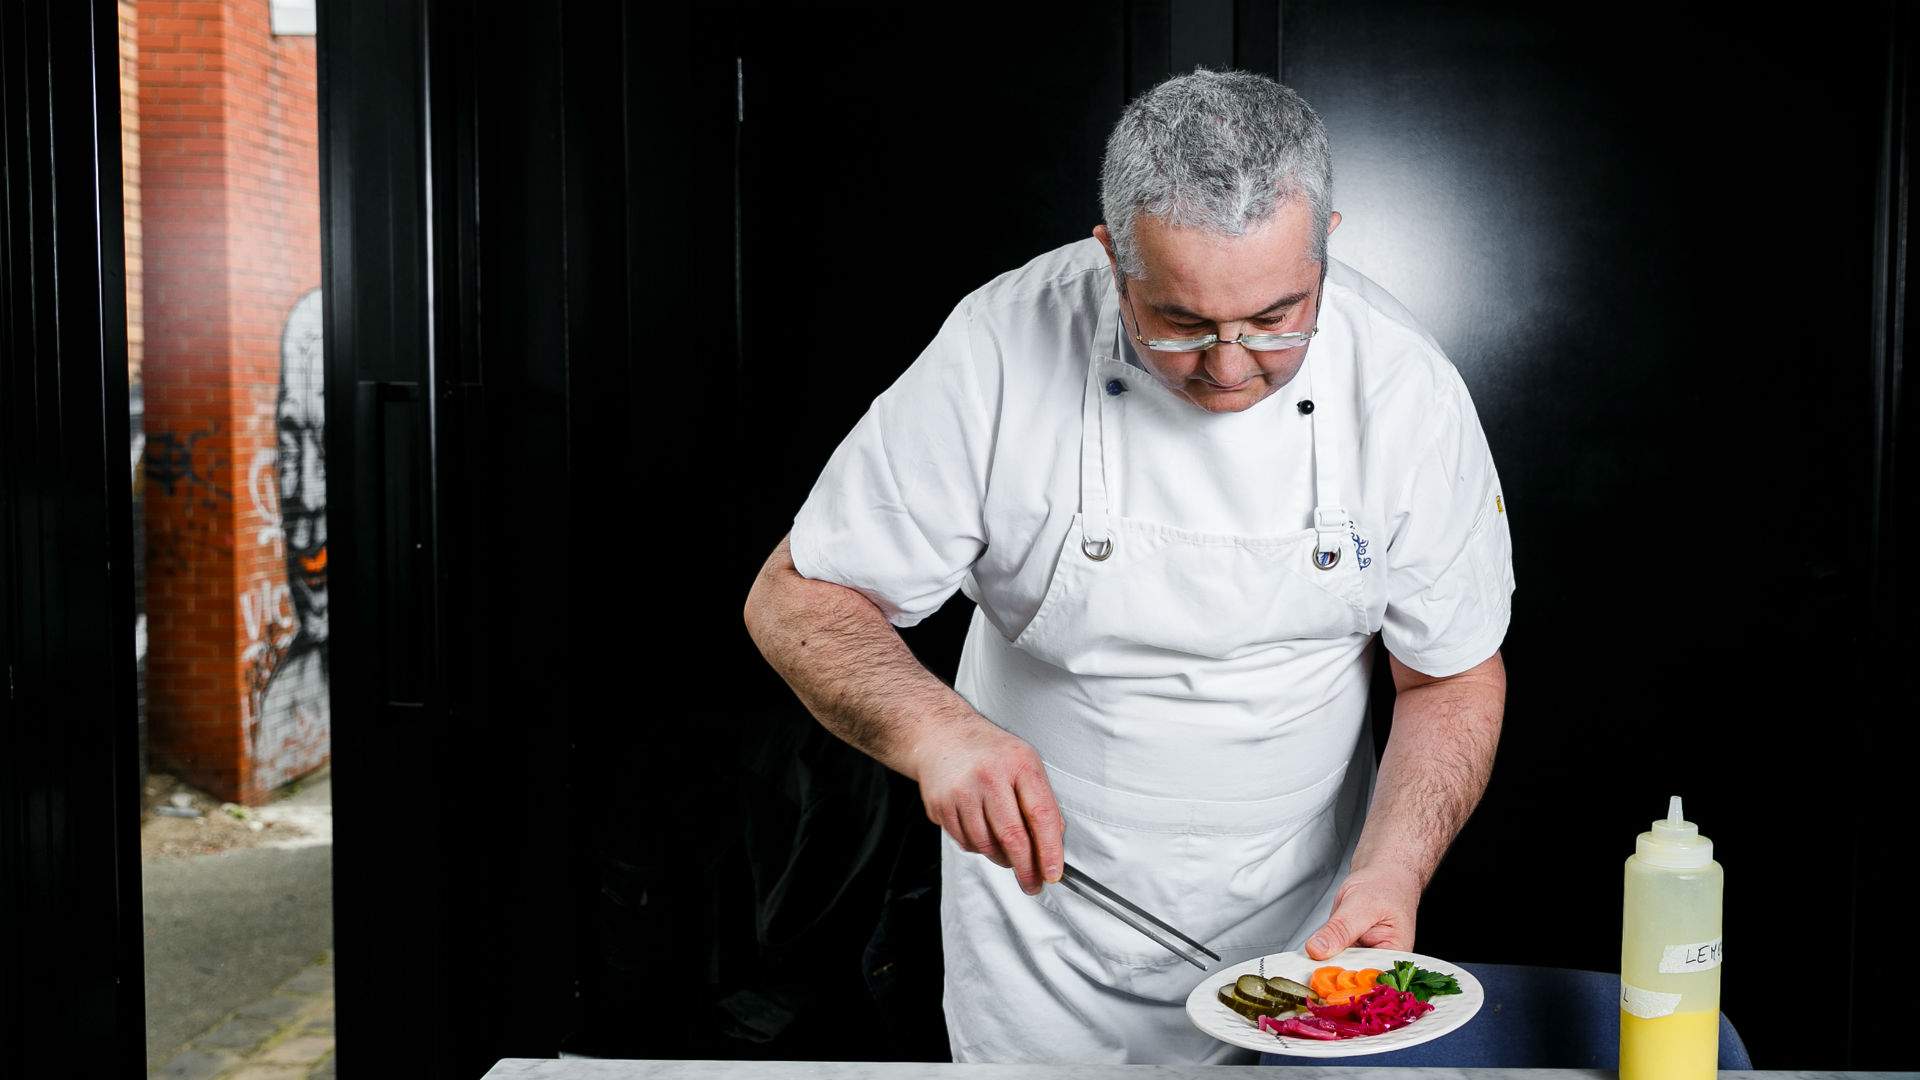 The Melbourne Restaurants That Ms Frankie's Head Chef Giorgio Distefano Visits for Inspiration